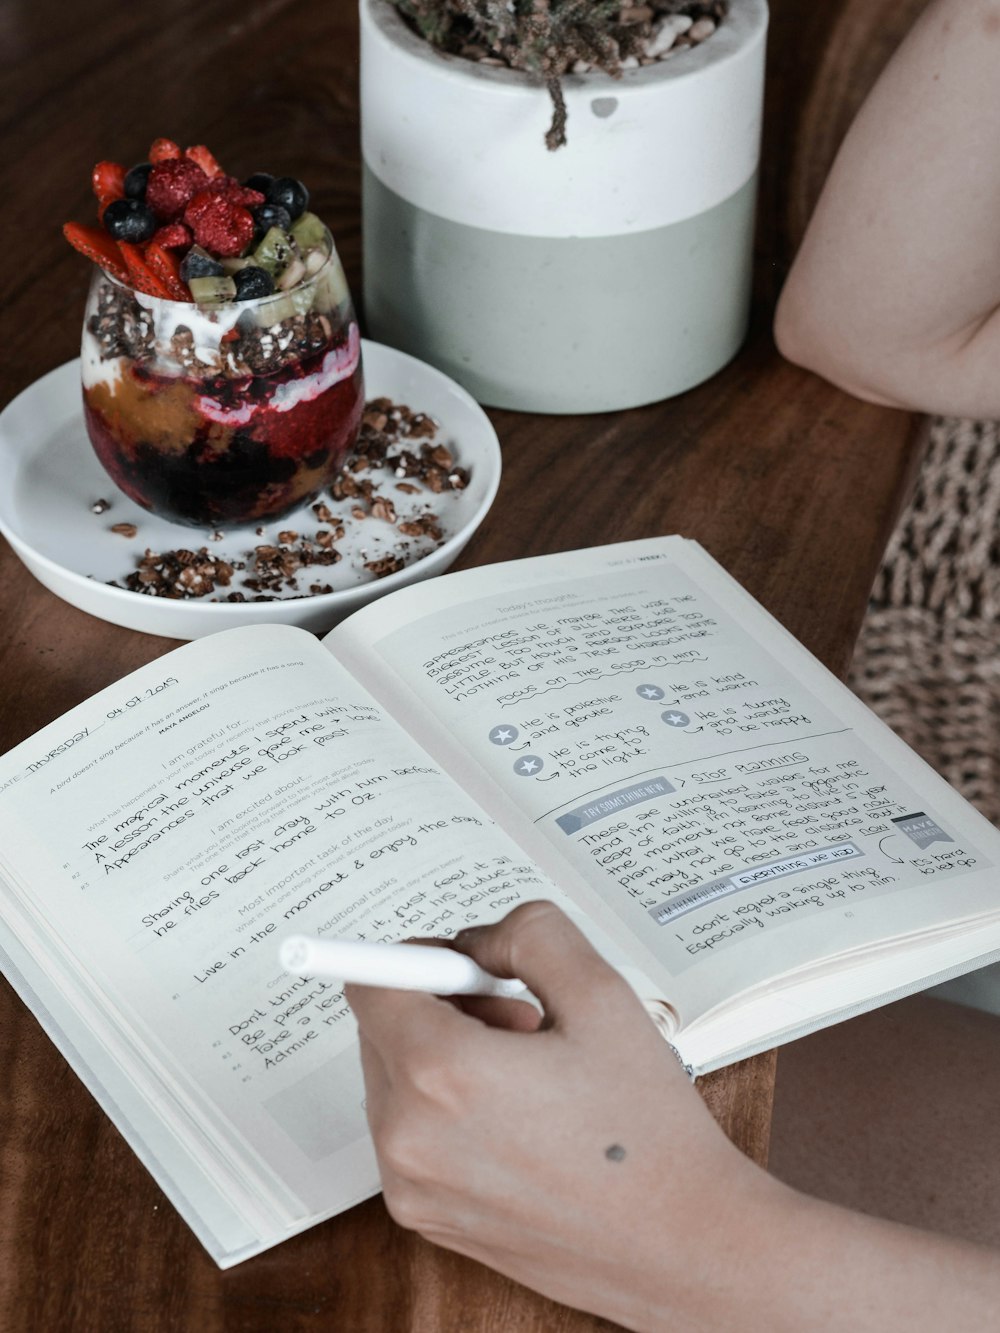 a person is reading a book with a dessert in the background